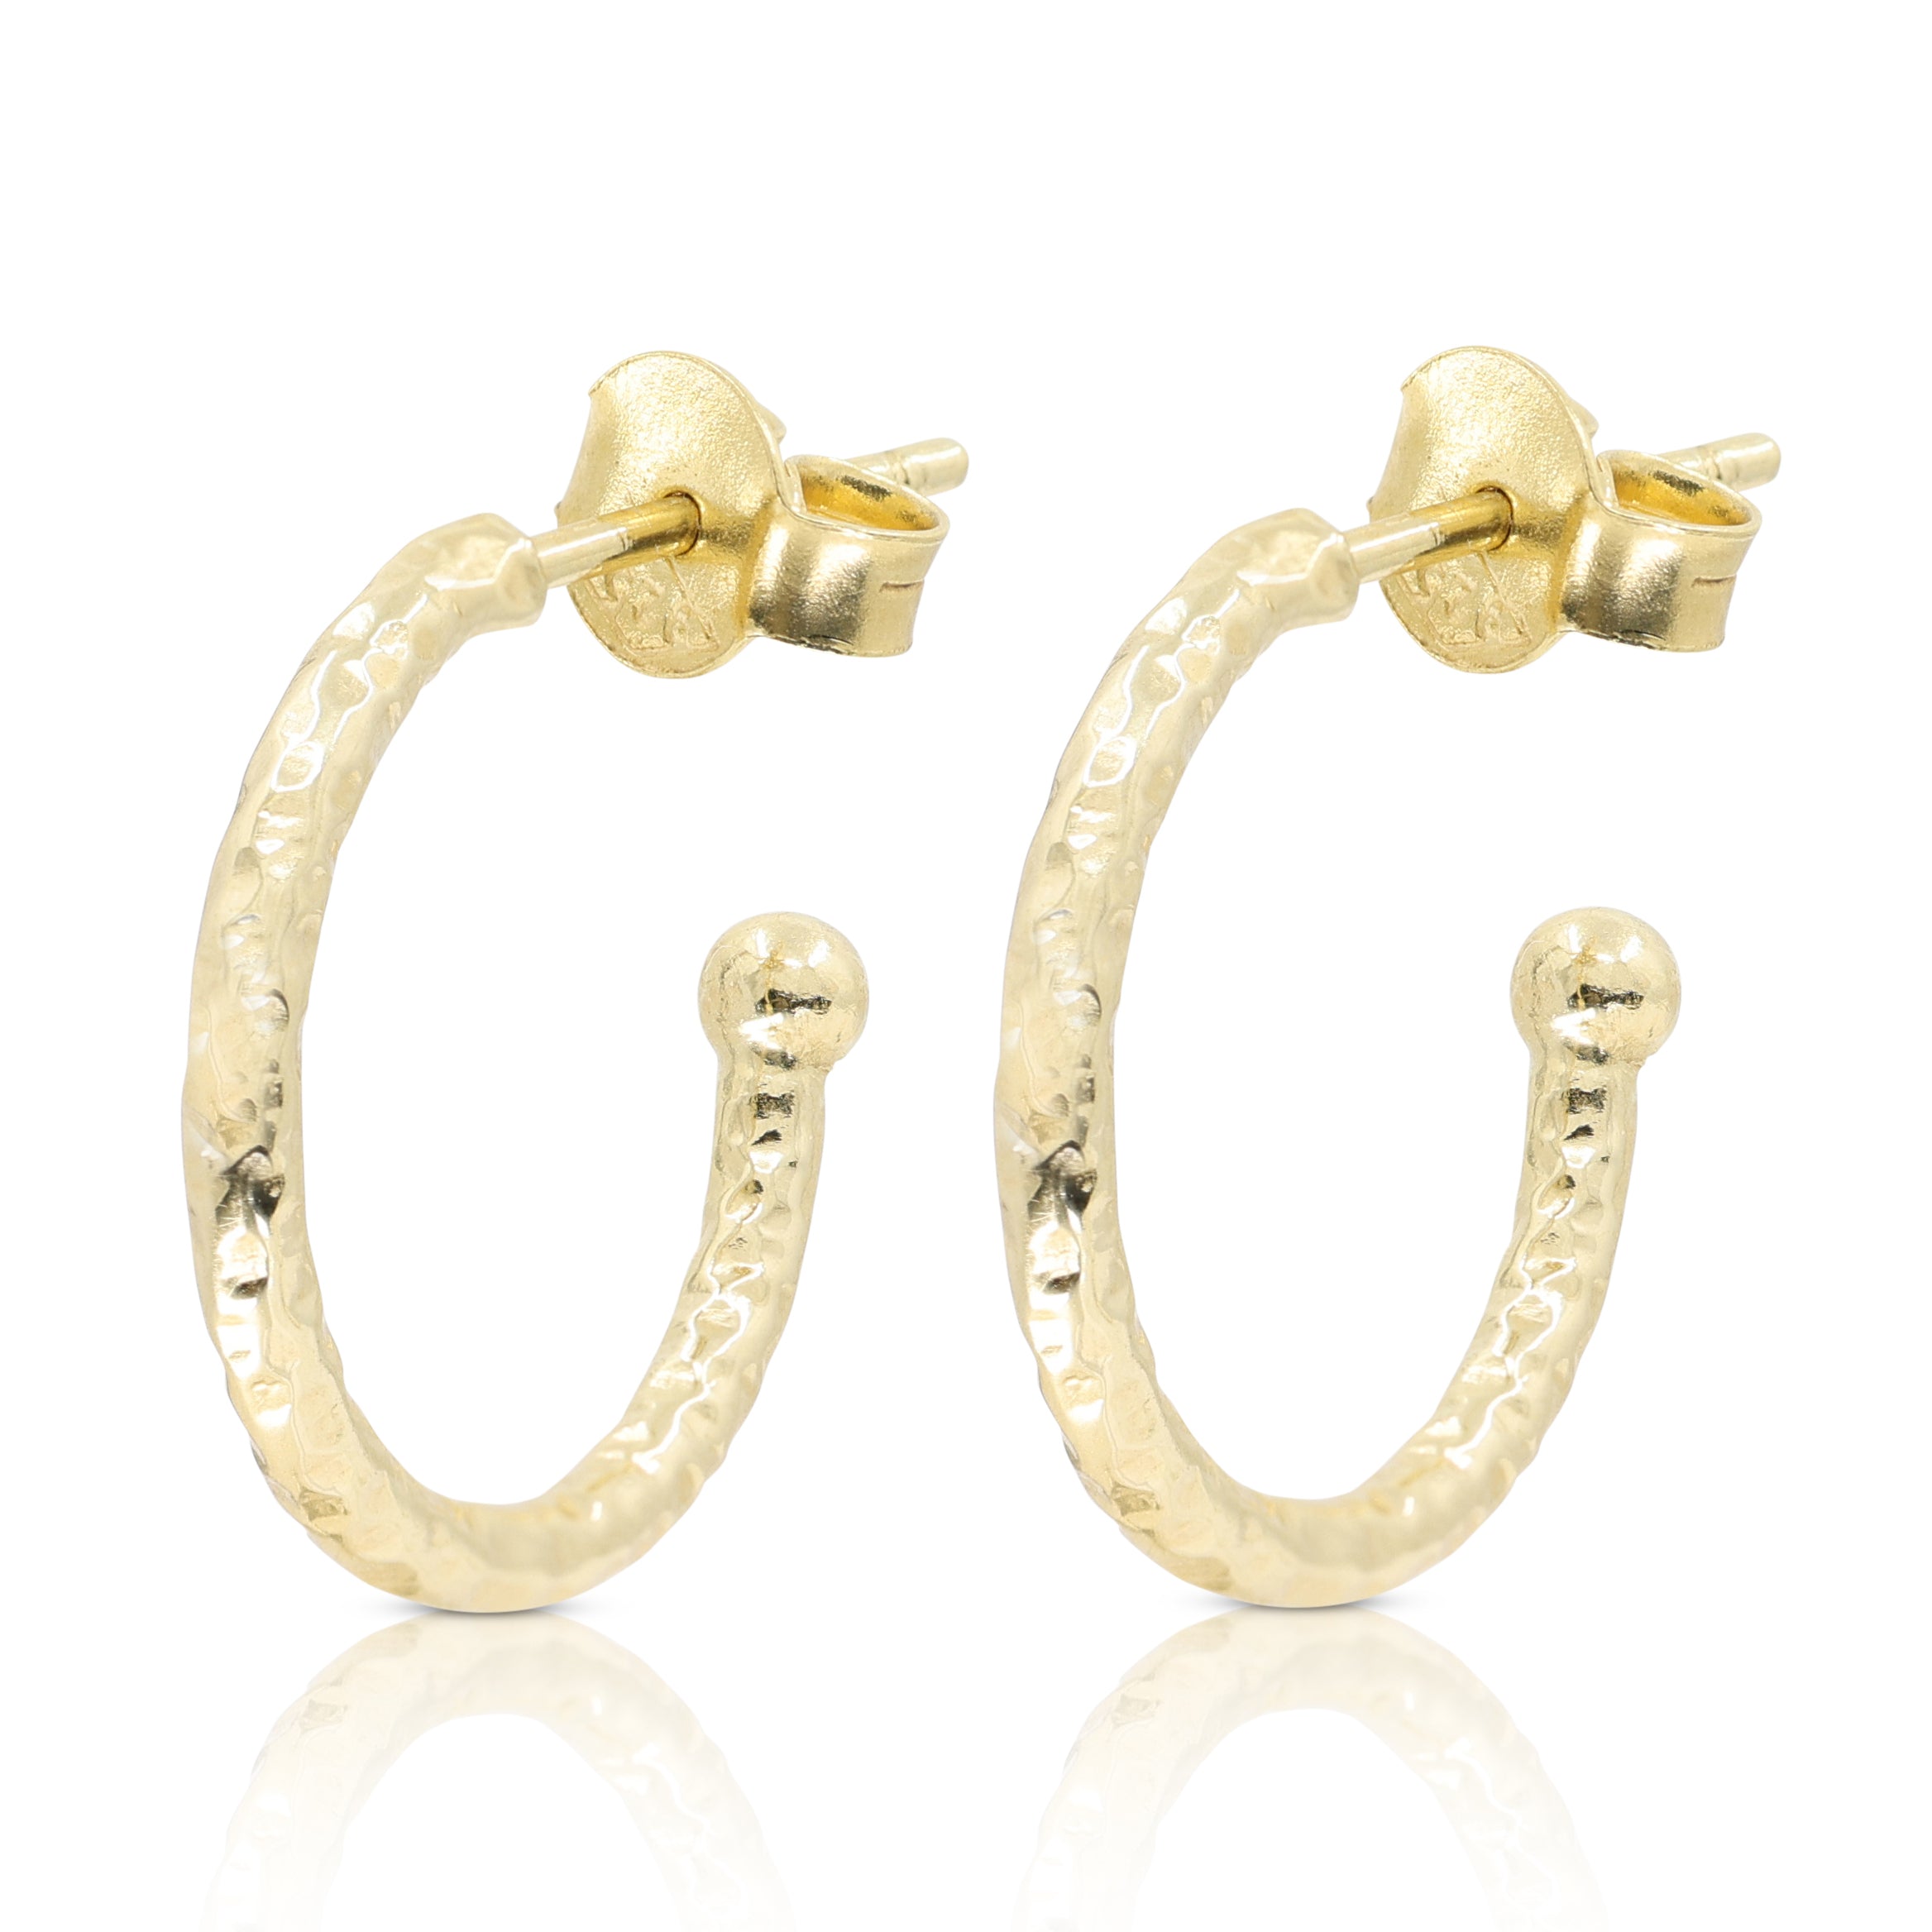 Textured Gold Hoops - Large